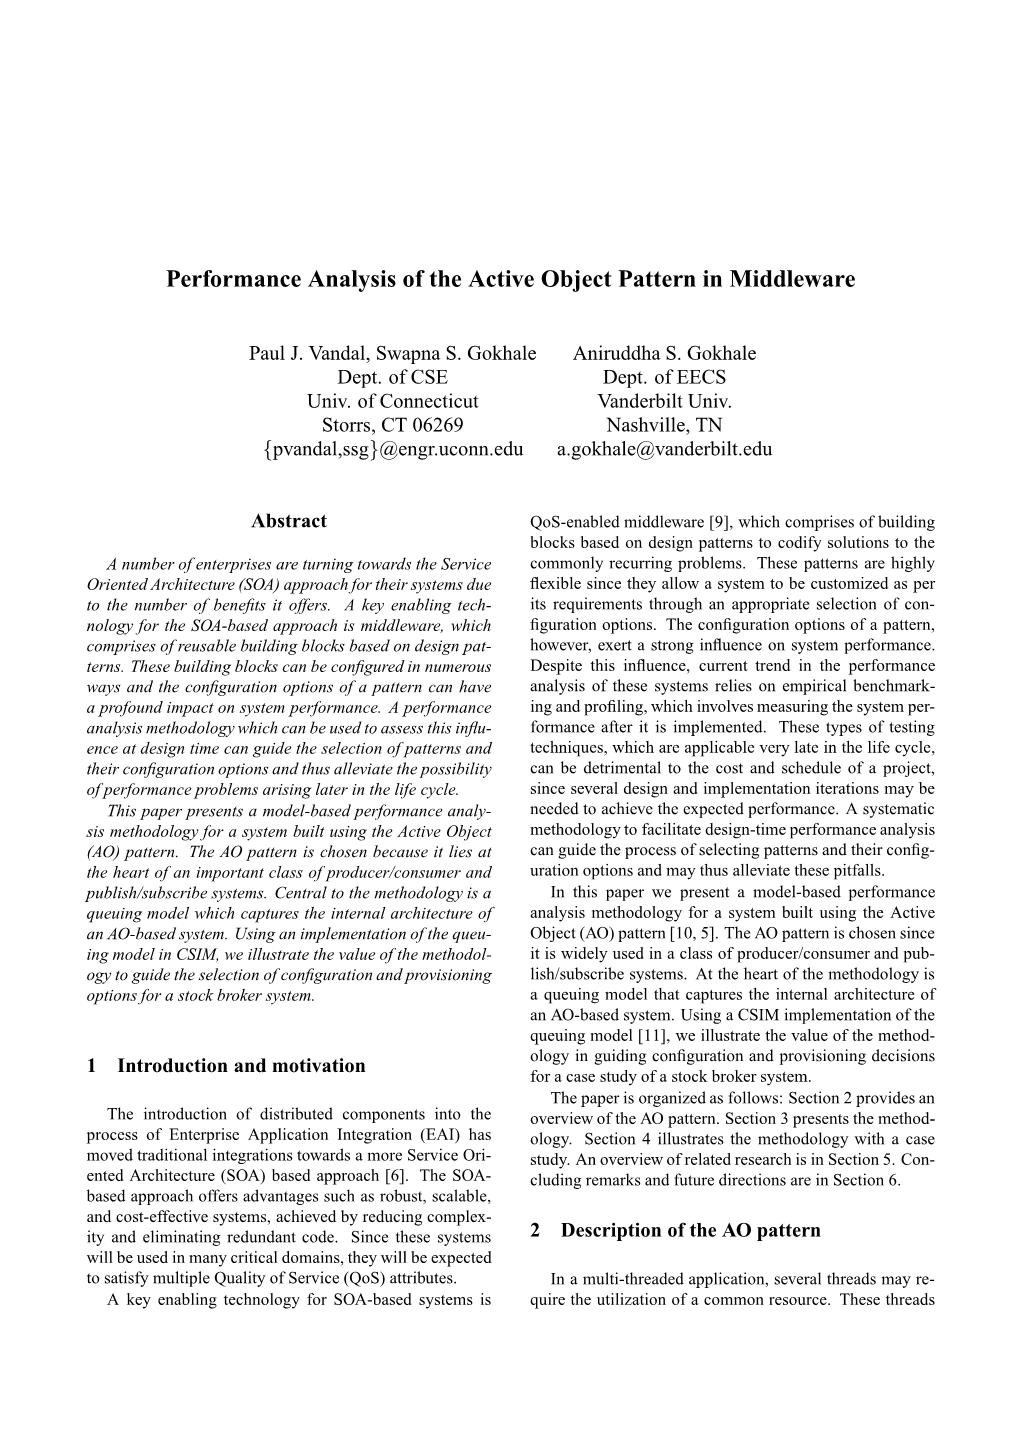 Performance Analysis of the Active Object Pattern in Middleware